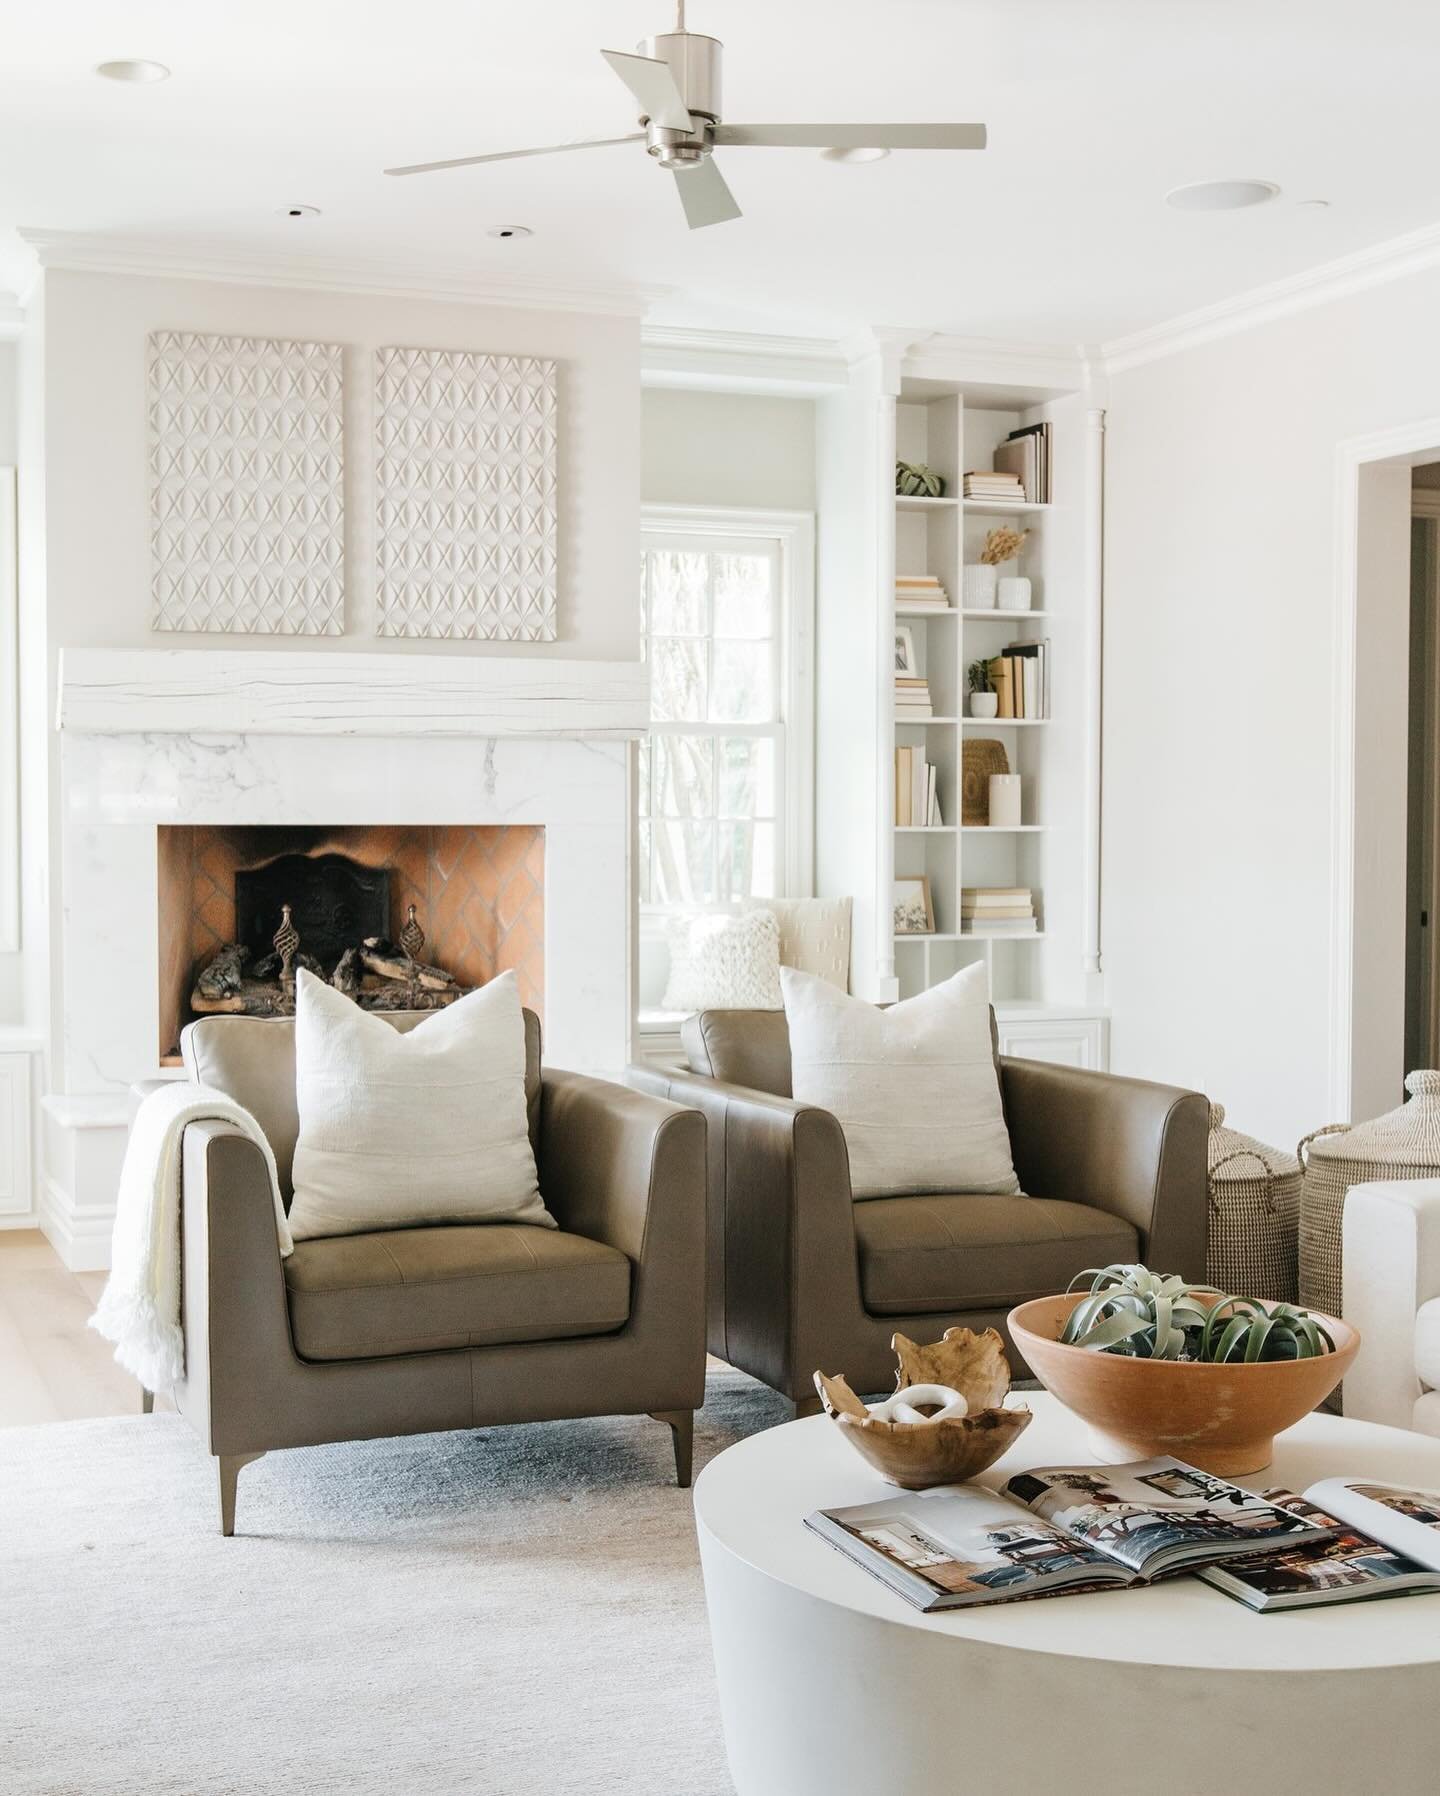 We couldn&rsquo;t help ourselves... back with another #throwbackthursday from last weeks featured project. We installed furnishings, styling, and lighting at this charming home over three years ago. Who else is wondering where the time has gone?!⁠
⁠
